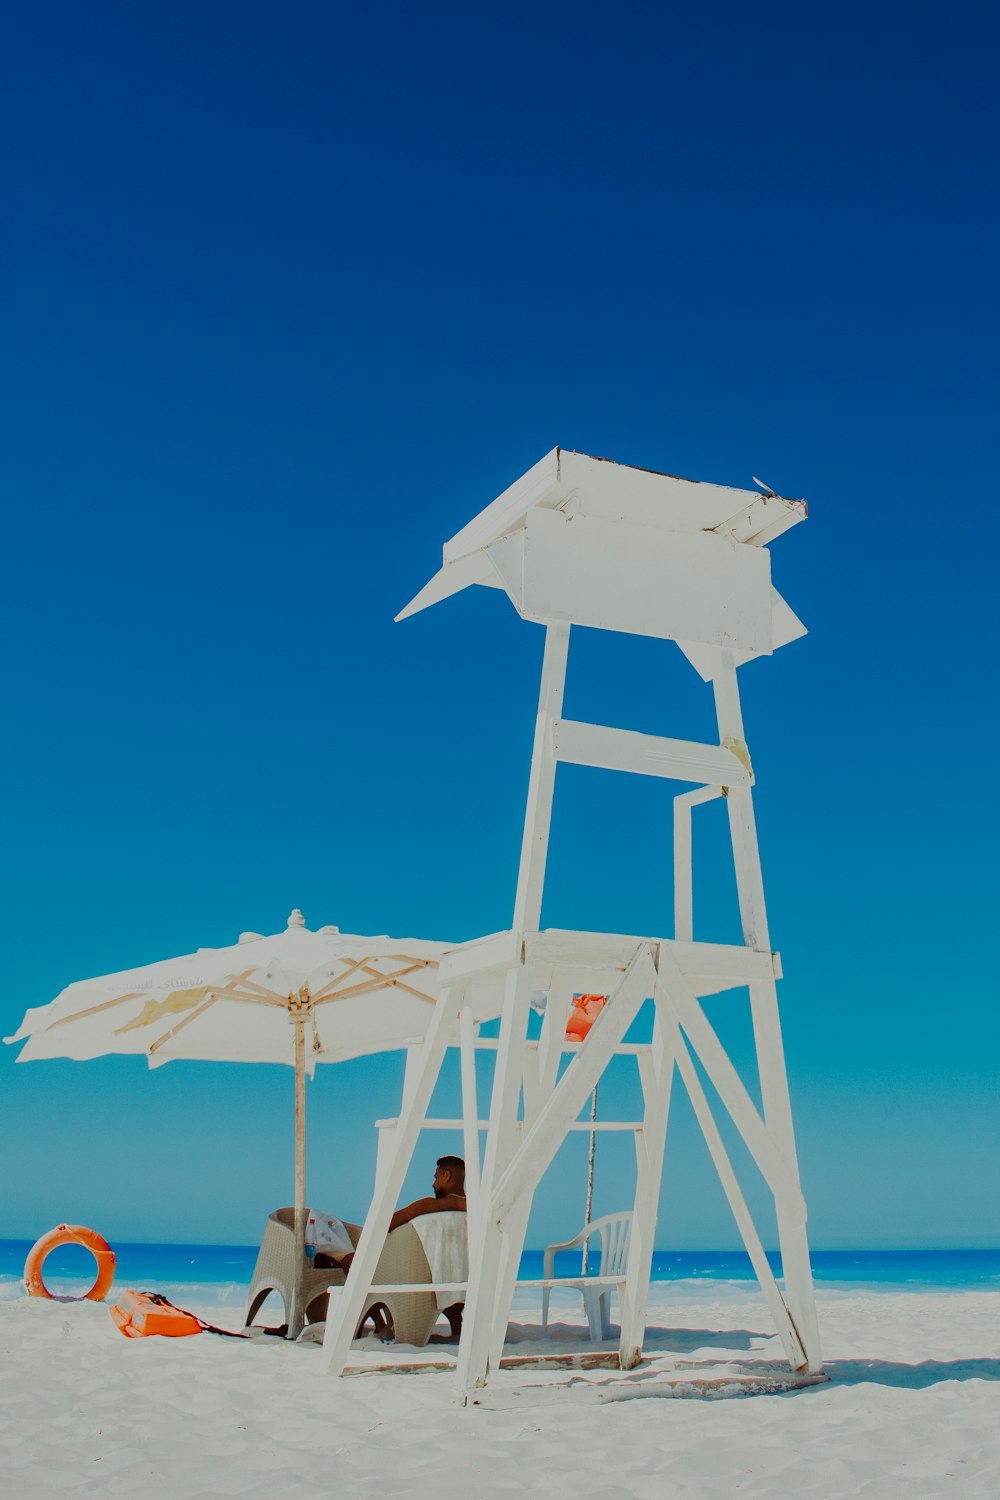 a lifeguard stand on the beach with a life preserver